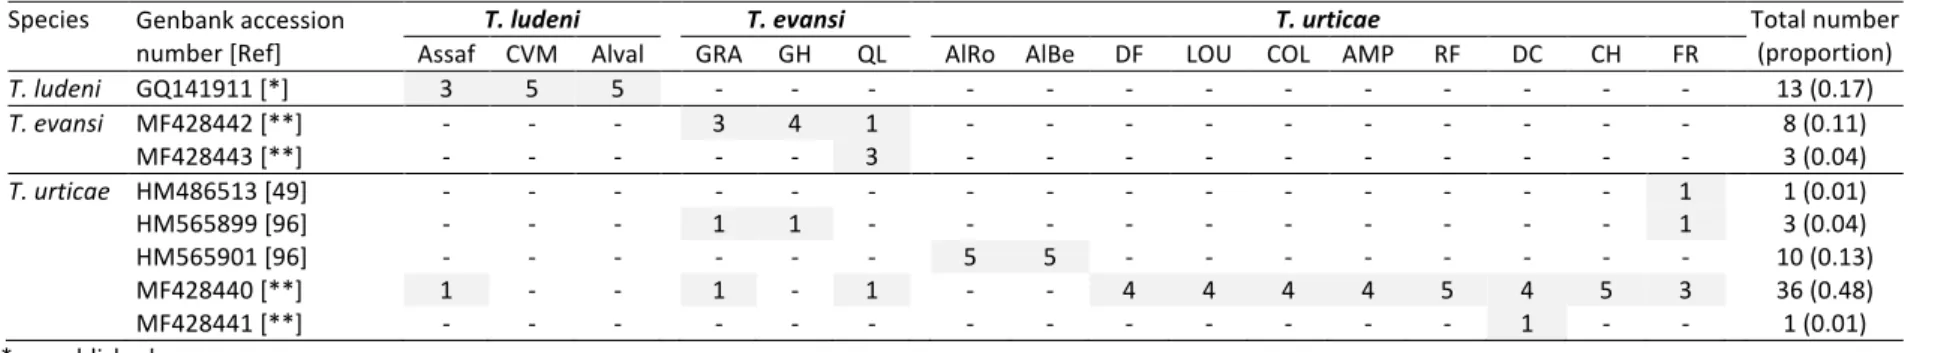 Table 2. Mitochondrial COI alleles in spider mite populations.  A total of 75 sequences were obtained from individual female spider mites